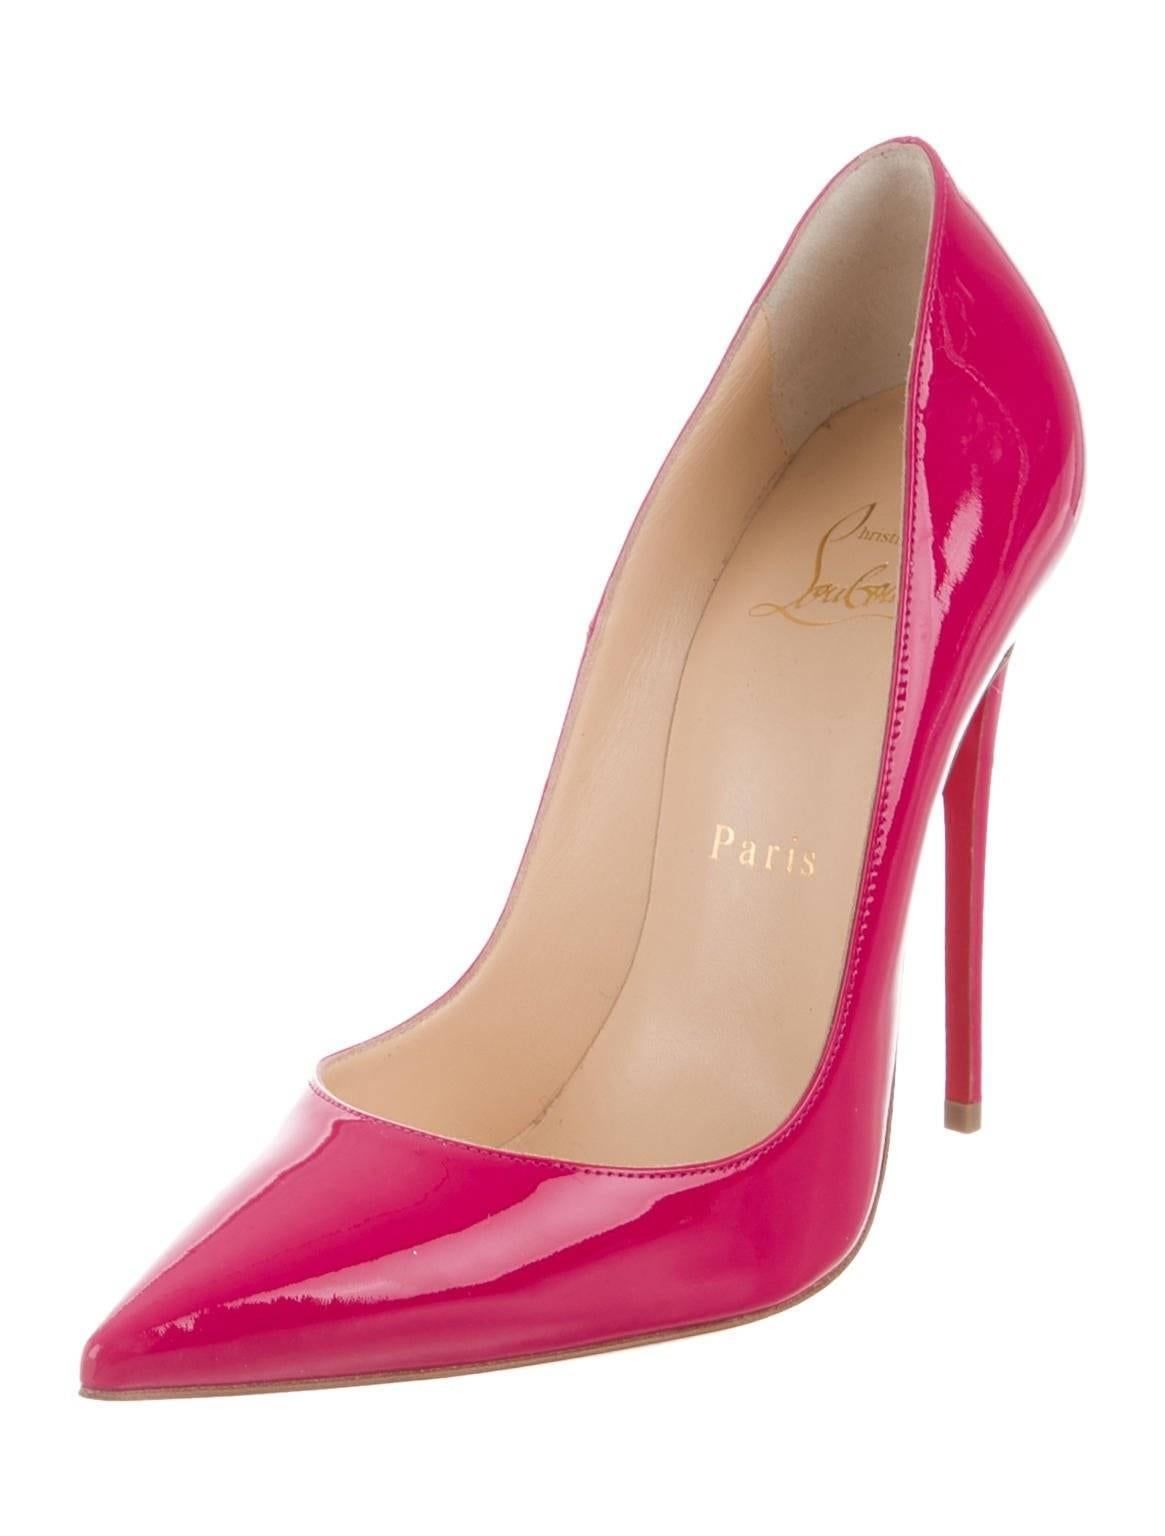 Christian Louboutin New Fuchsia Patent Leather So Kate Evening High Heels Pumps in Box  

Size IT 36.5
Patent leather 
Slip on
Made in Italy
Heel height 4.75